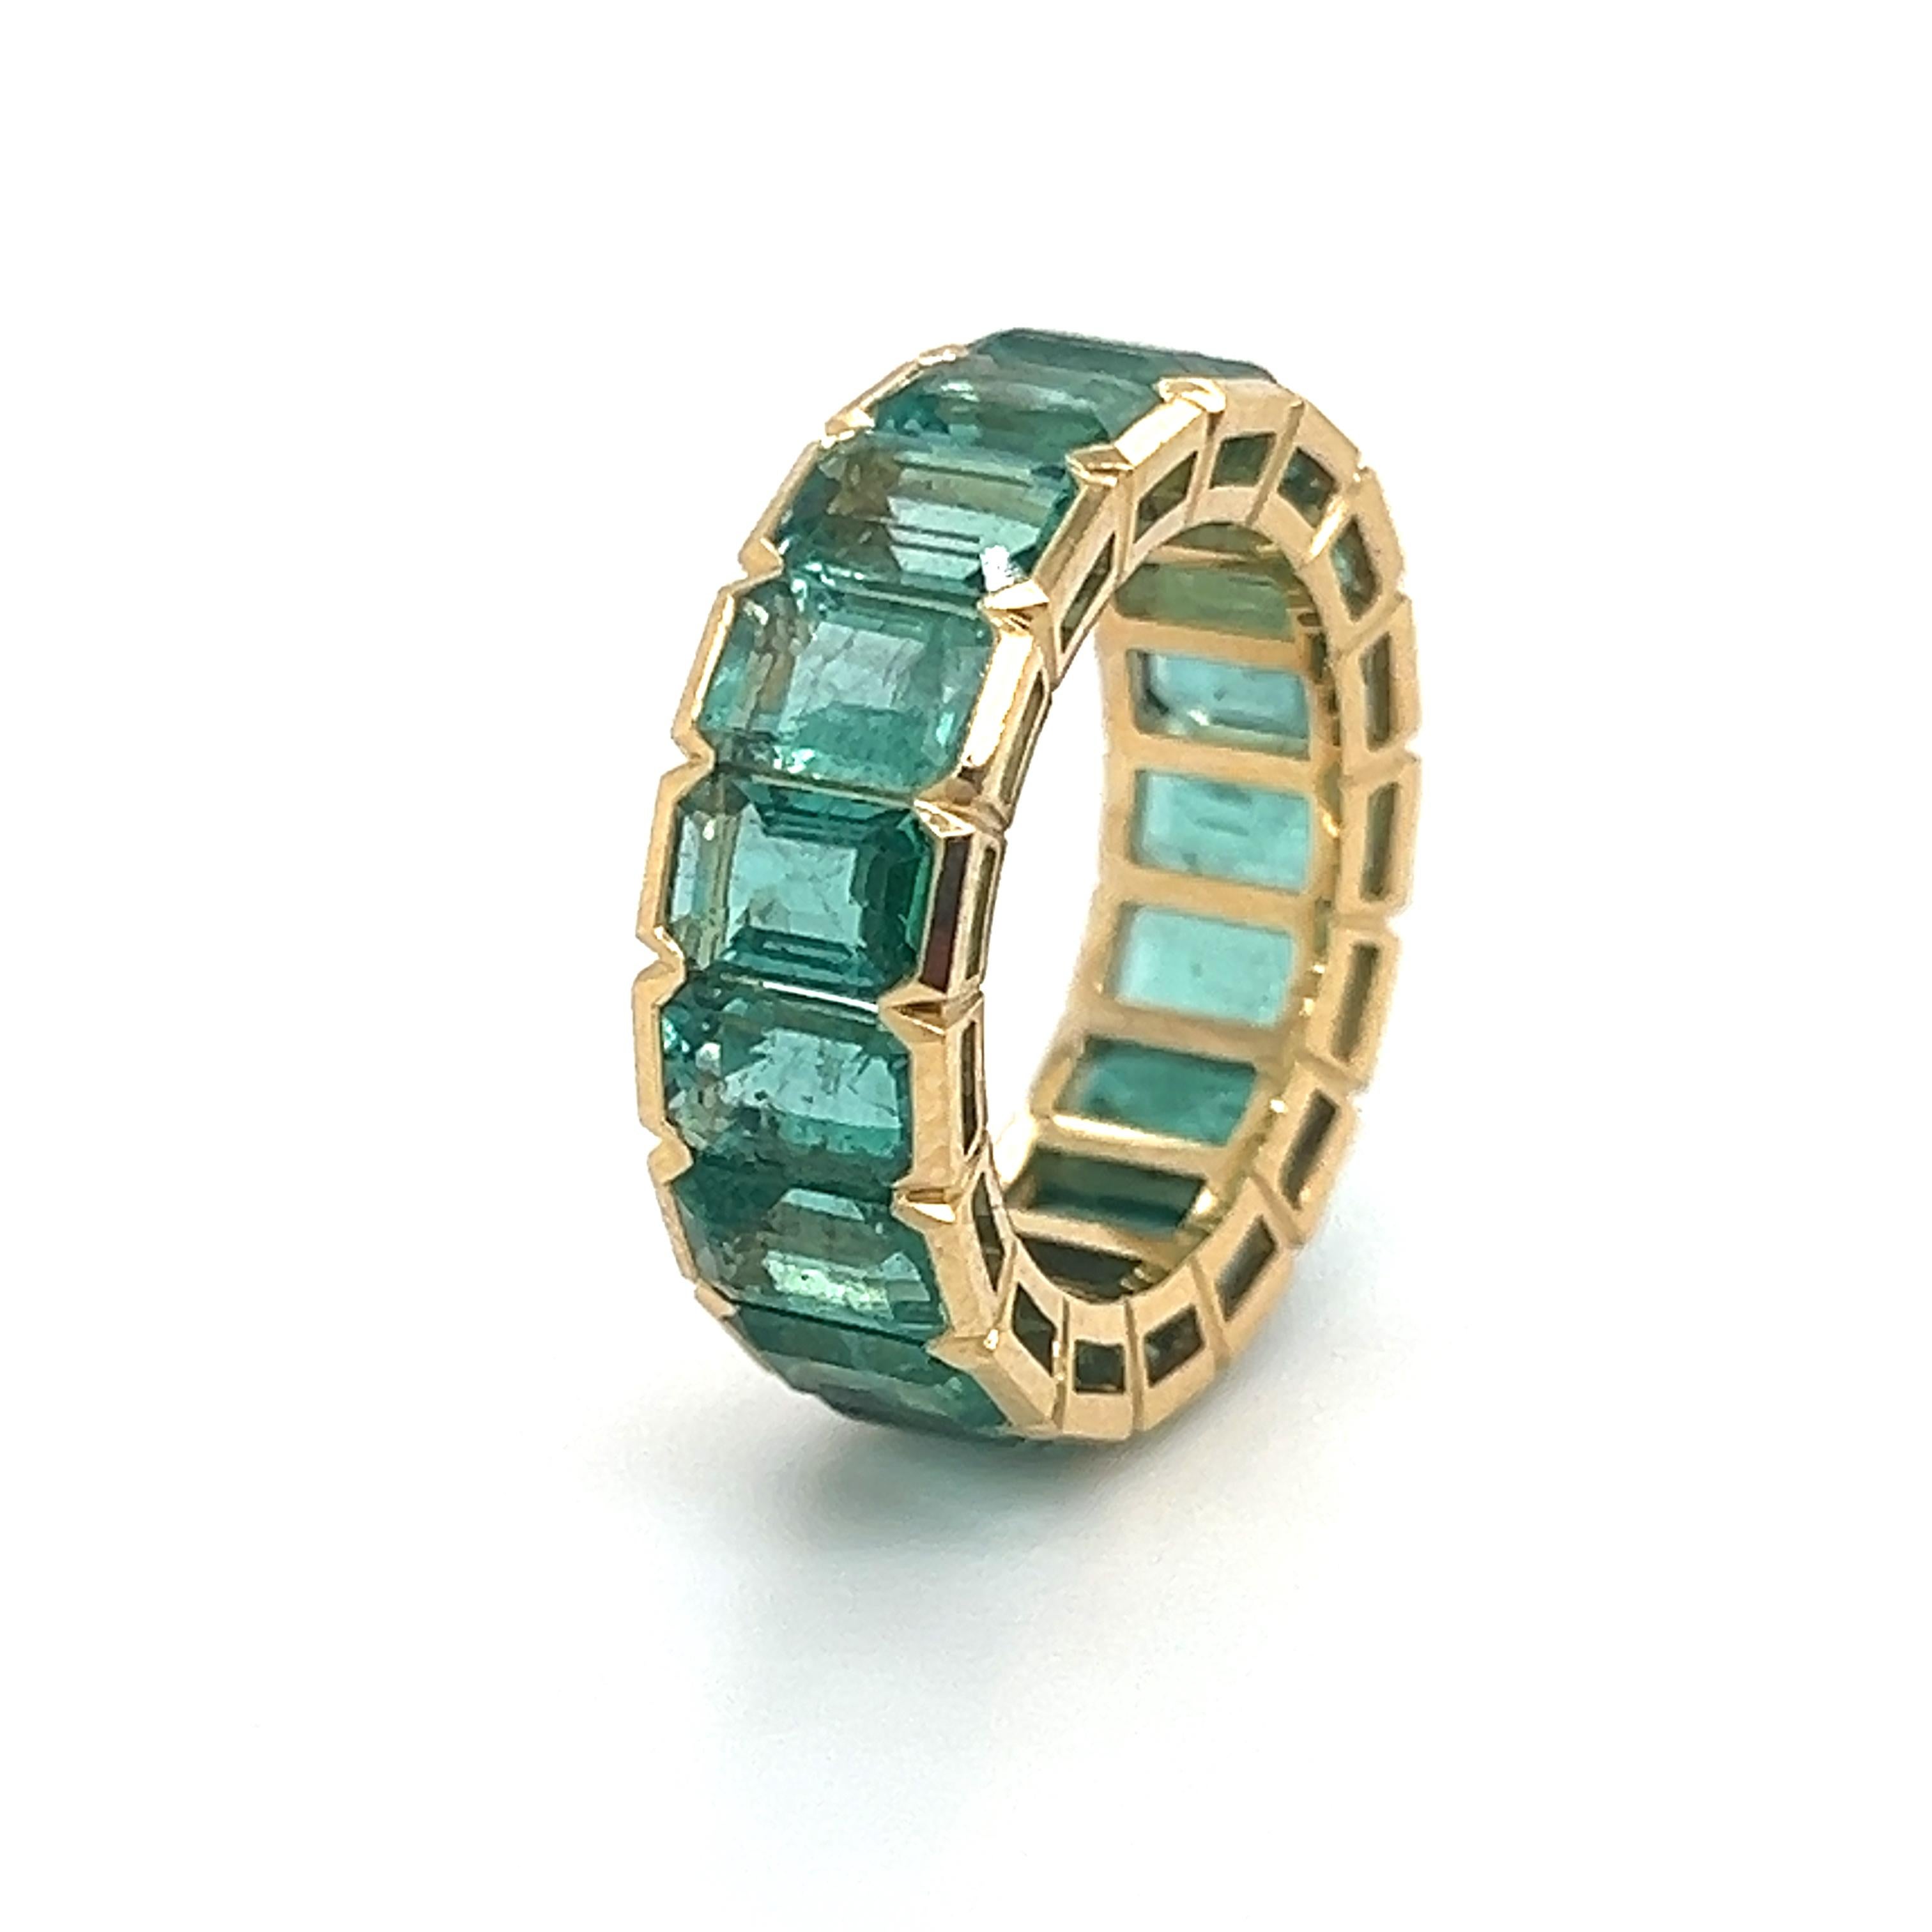 One of a kind hand crafted ring in 18k yellow gold. The highlights seventeen Colombian emerald gemstones that display a vibrant green color.  Each emerald in the ring weighs approximately 0.55 carat, giving the ring a 9.35 total carat weight. 
This